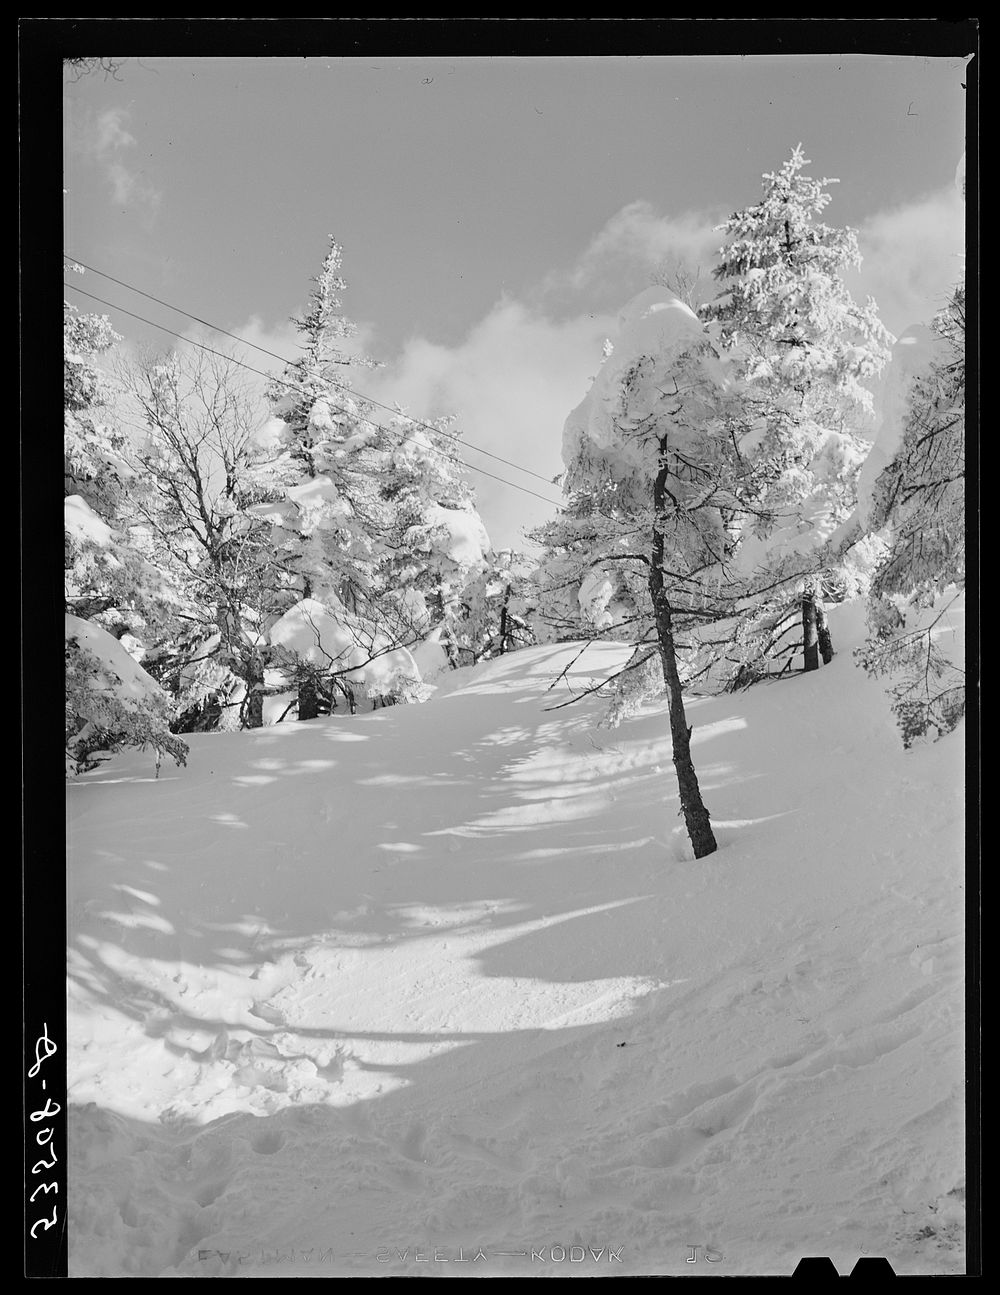 Snow-covered trees on top of Cannon Mountain. Franconia Notch, New Hampshire. Sourced from the Library of Congress.